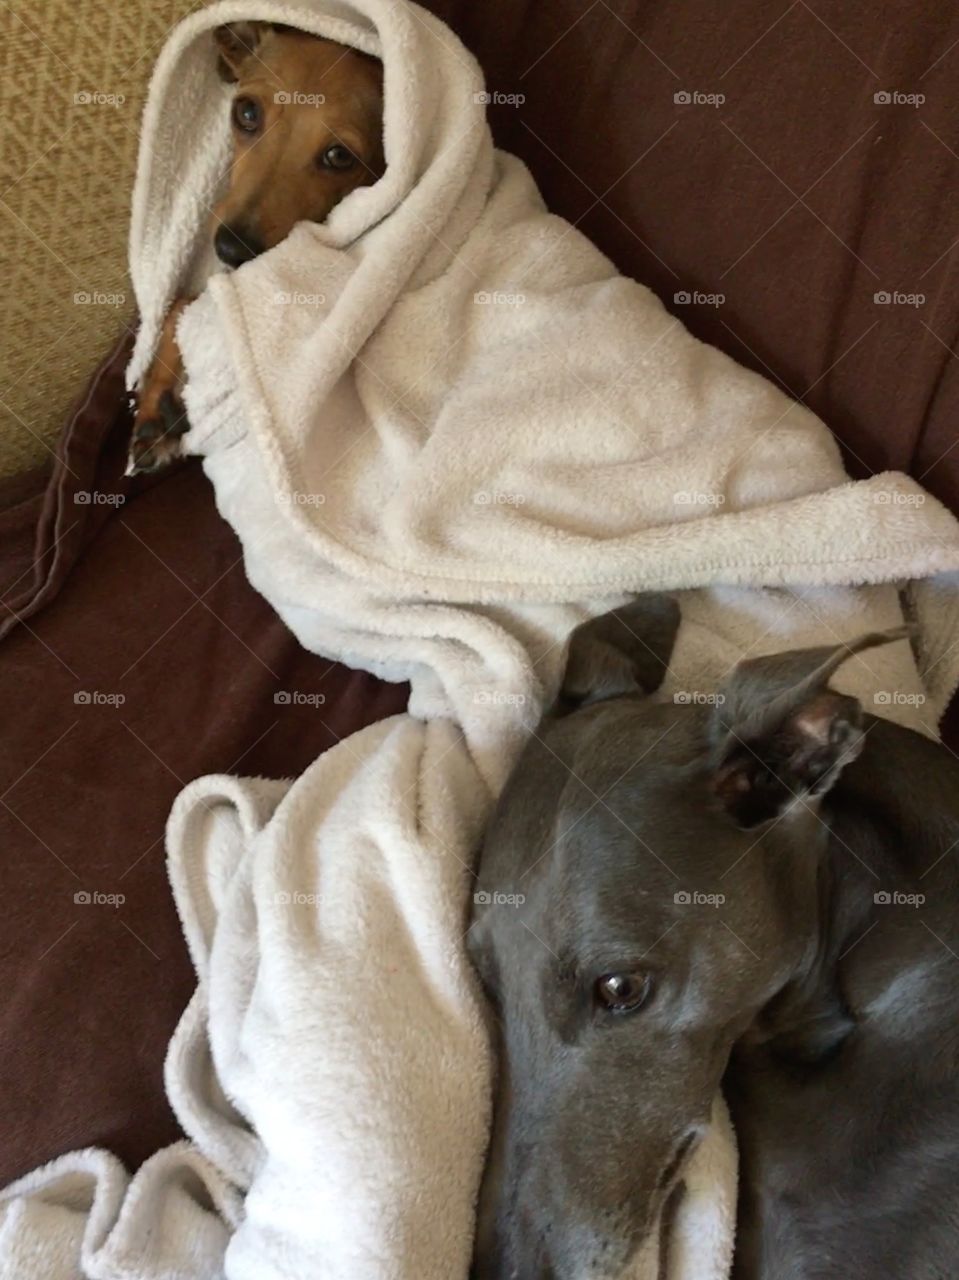 Amber the Italian greyhound puppy and Libby the whippet snuggled up together relaxing